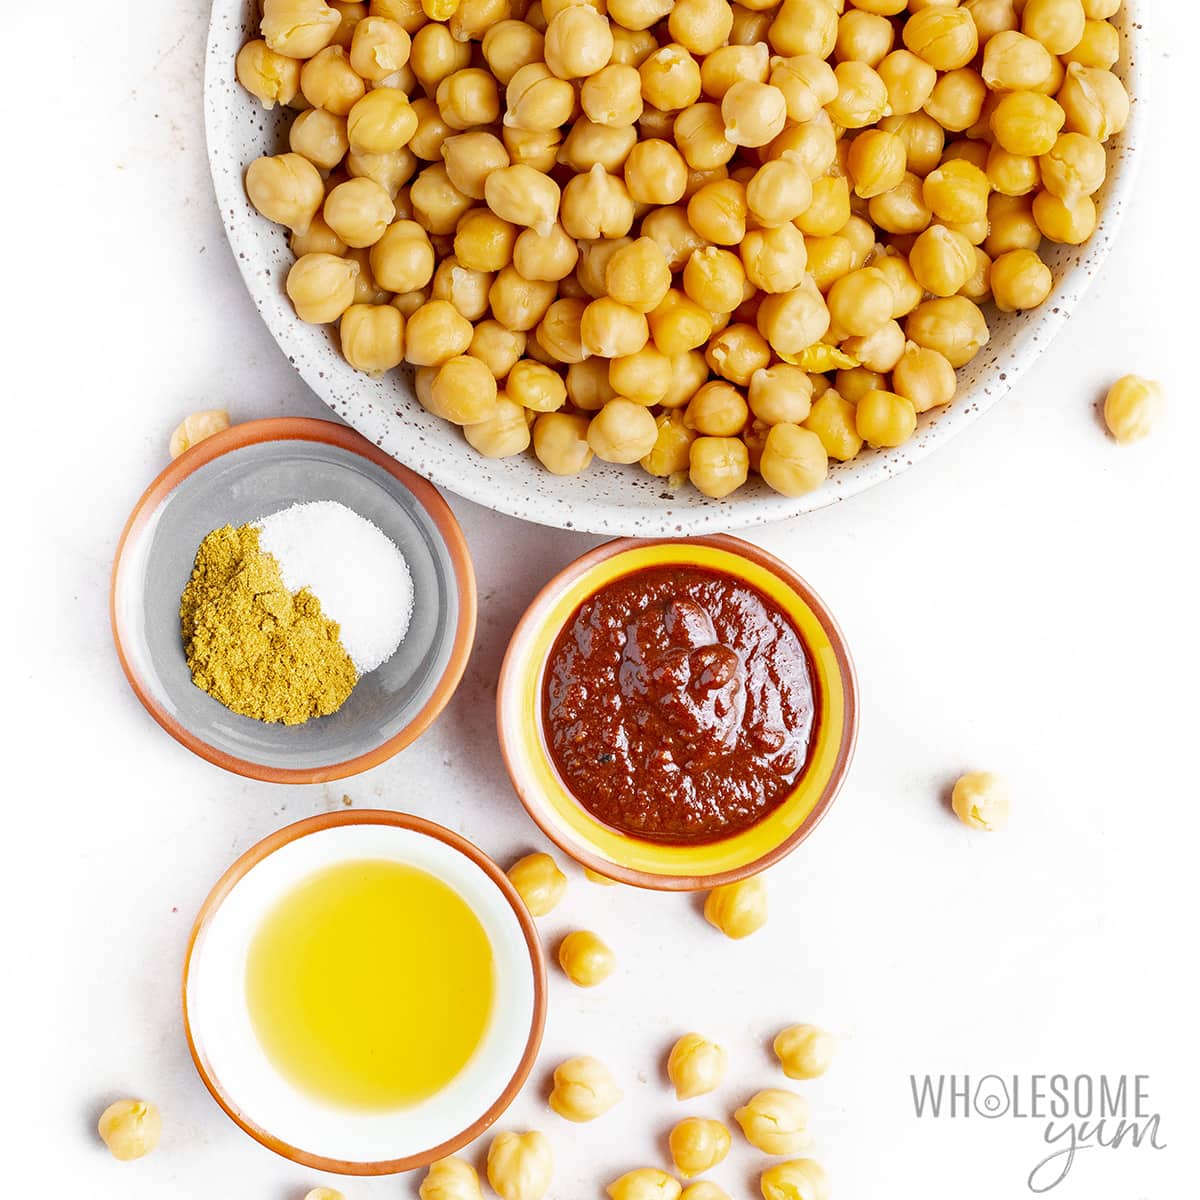 Ingredients for how to roast chickpeas in bowls.